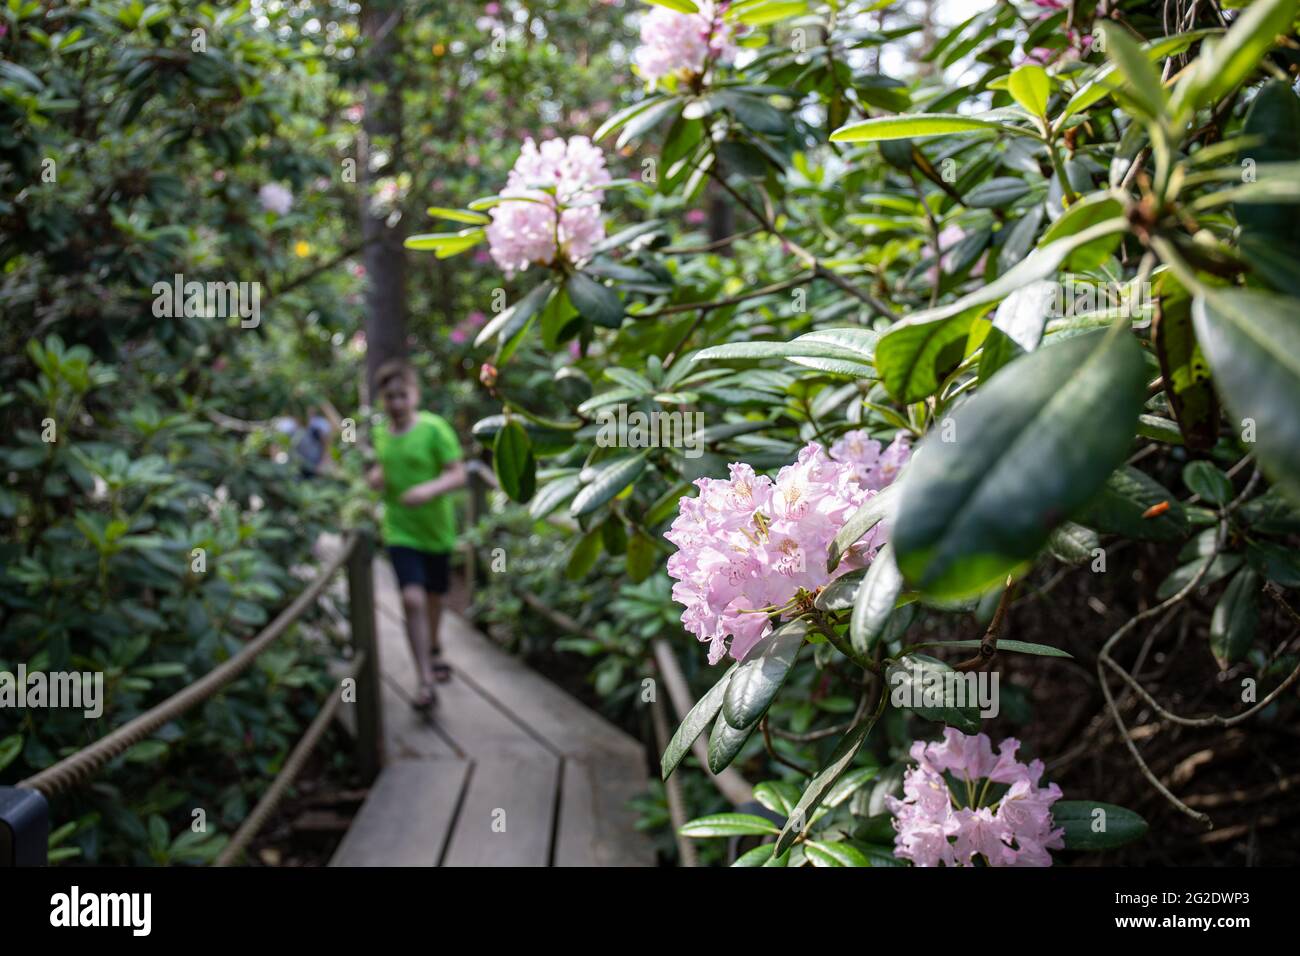 Haaga Rhododendron Park. Flowers in focus, running kid on wooden walkway in the background. Helsinki, Finland. Stock Photo